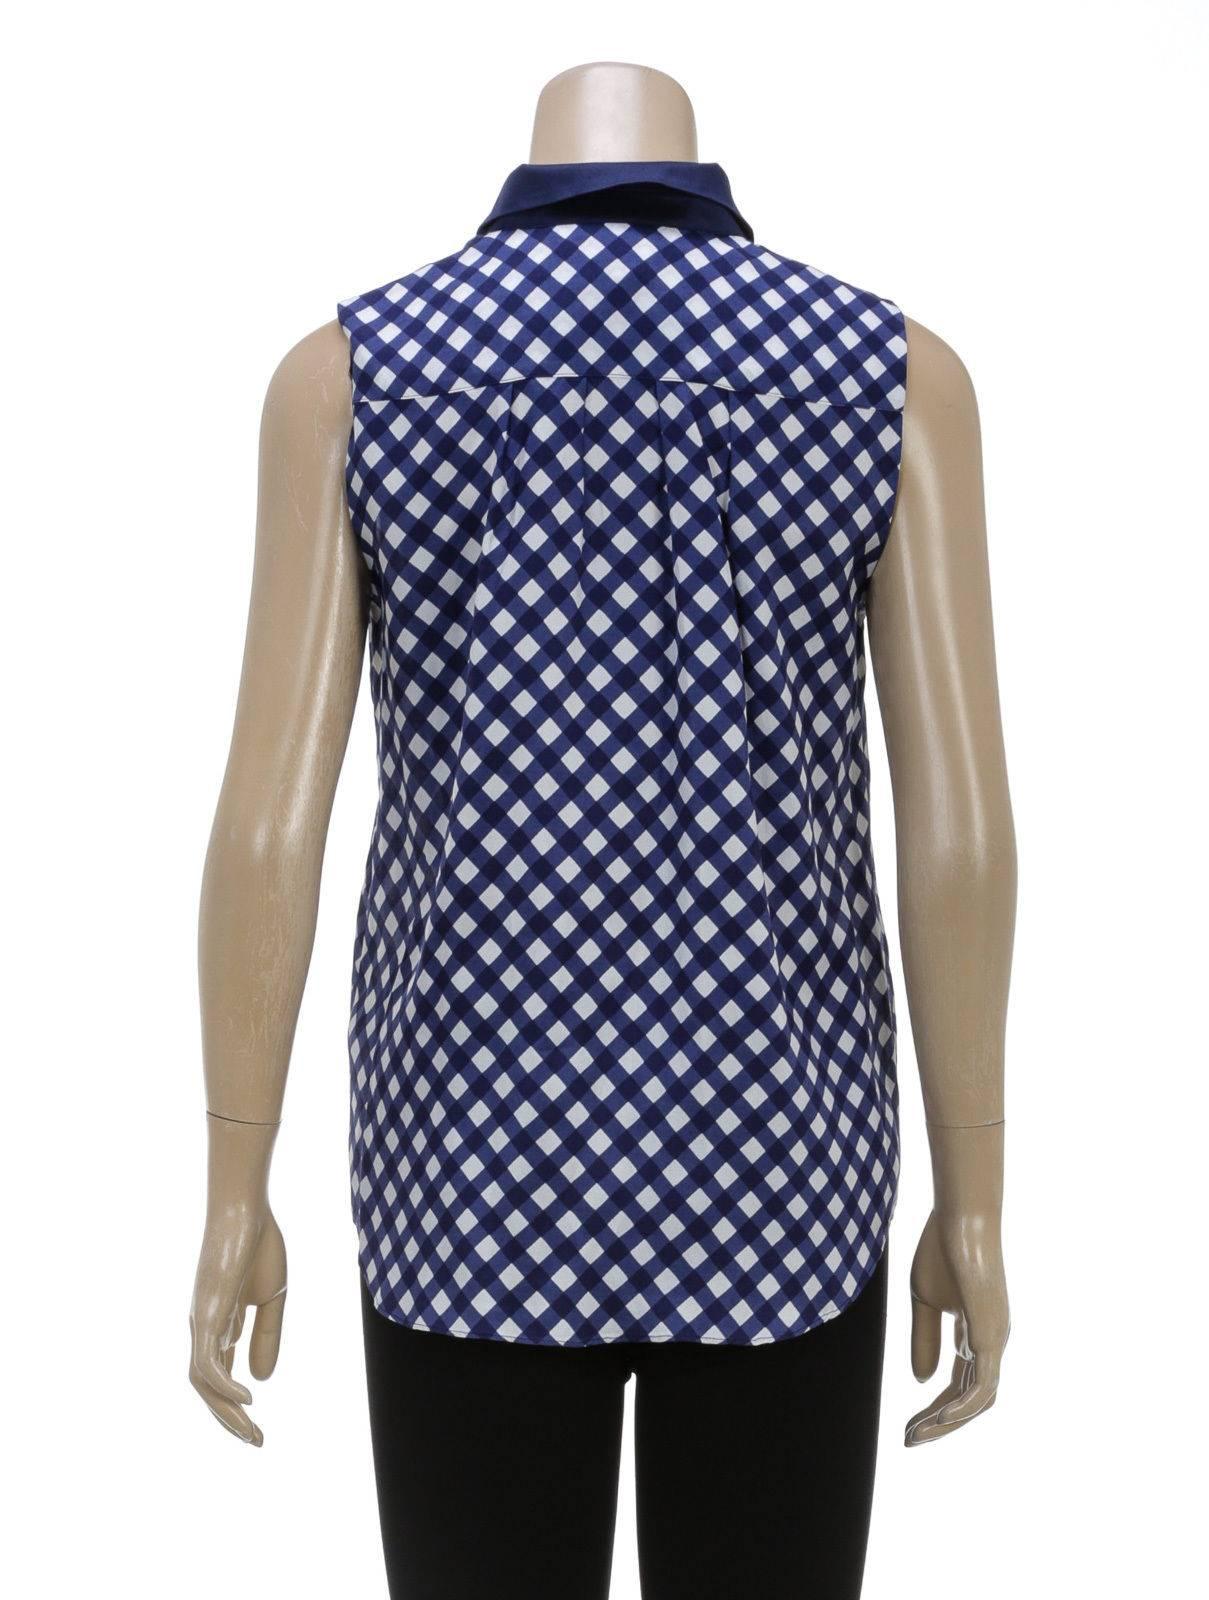 Kate Spade Blue and White Sleeveless Gingham Button Top (Size 8) For Sale 1